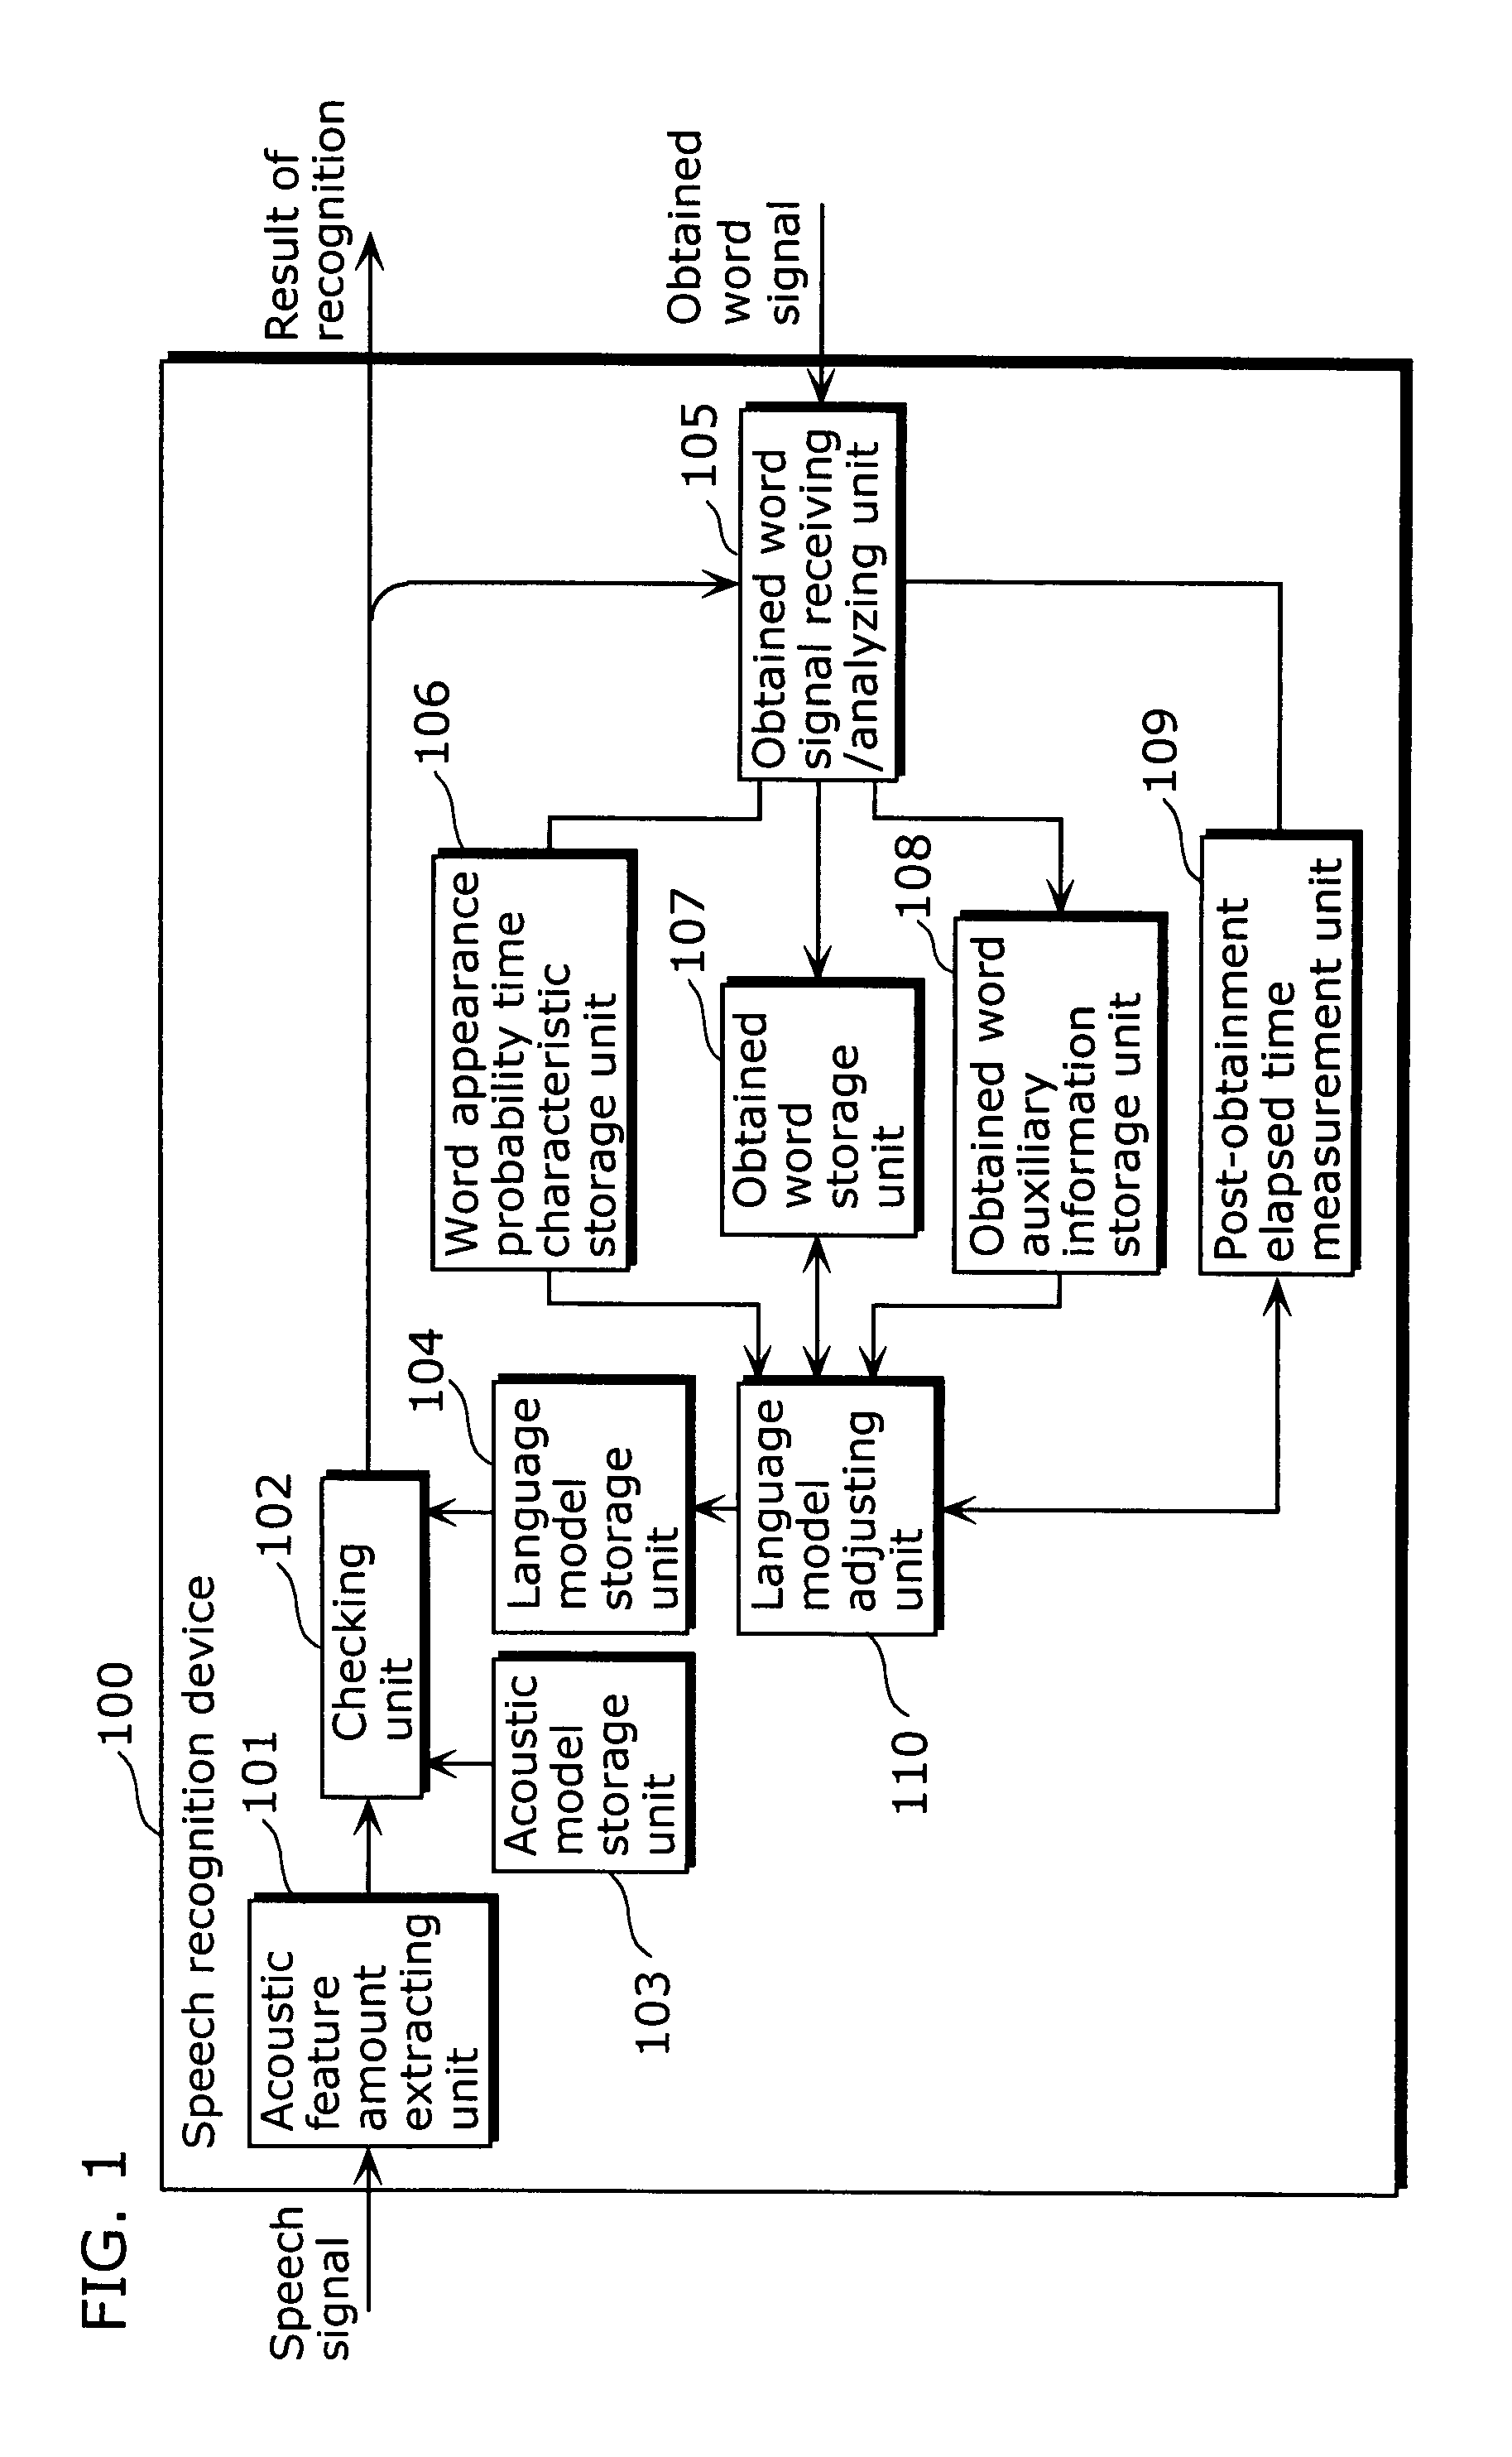 Speech recognition device and method of recognizing speech using a language model